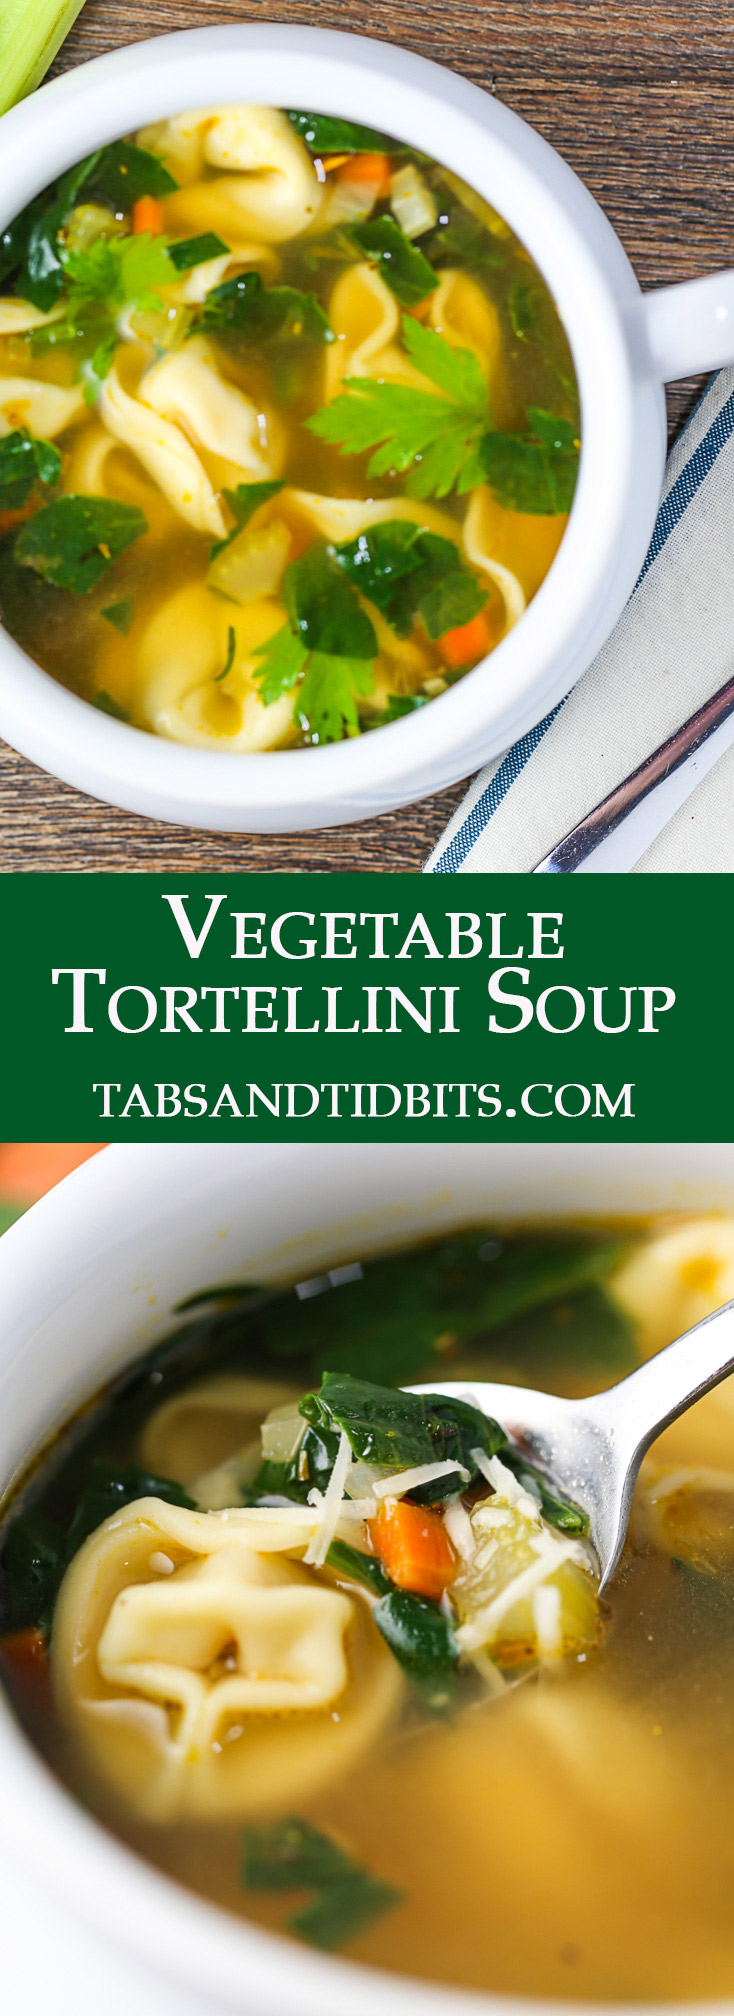 This Vegetable Tortellini is what I call a comforting soothing bowl of soup. Cheese tortellini with carrots, celery, spinach in a warm and soothing vegetable broth!